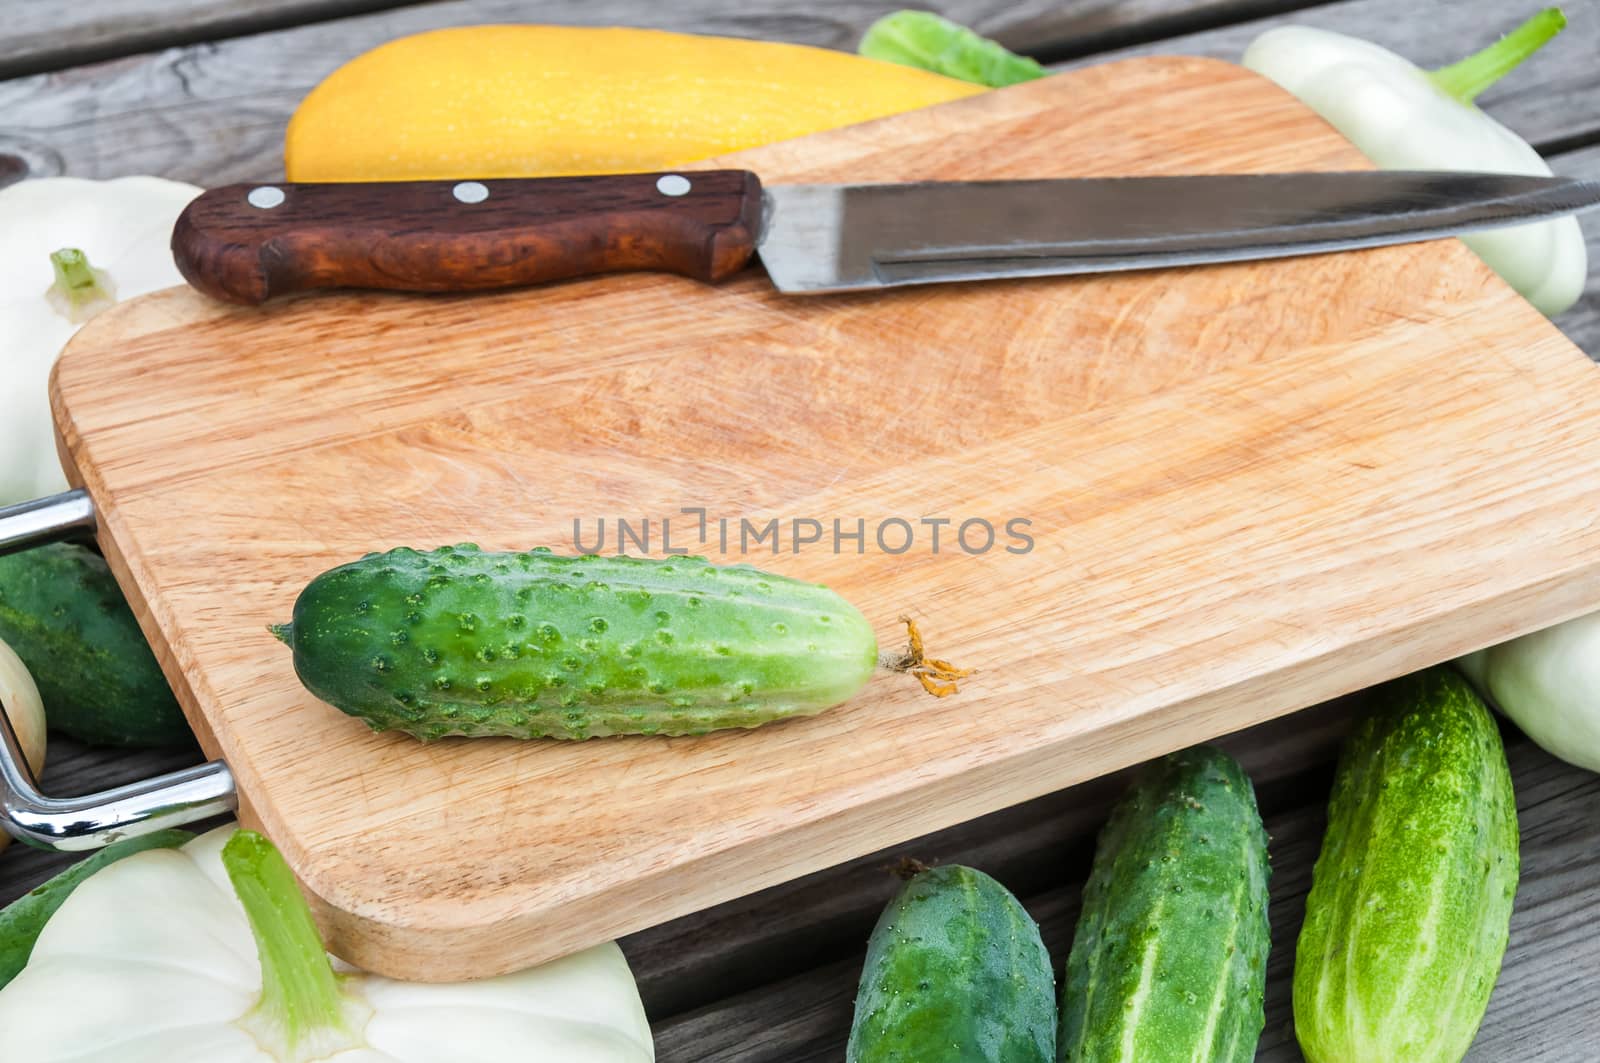 Cutting board, knife, fresh vegetables on wooden table.  Top view with copy space.